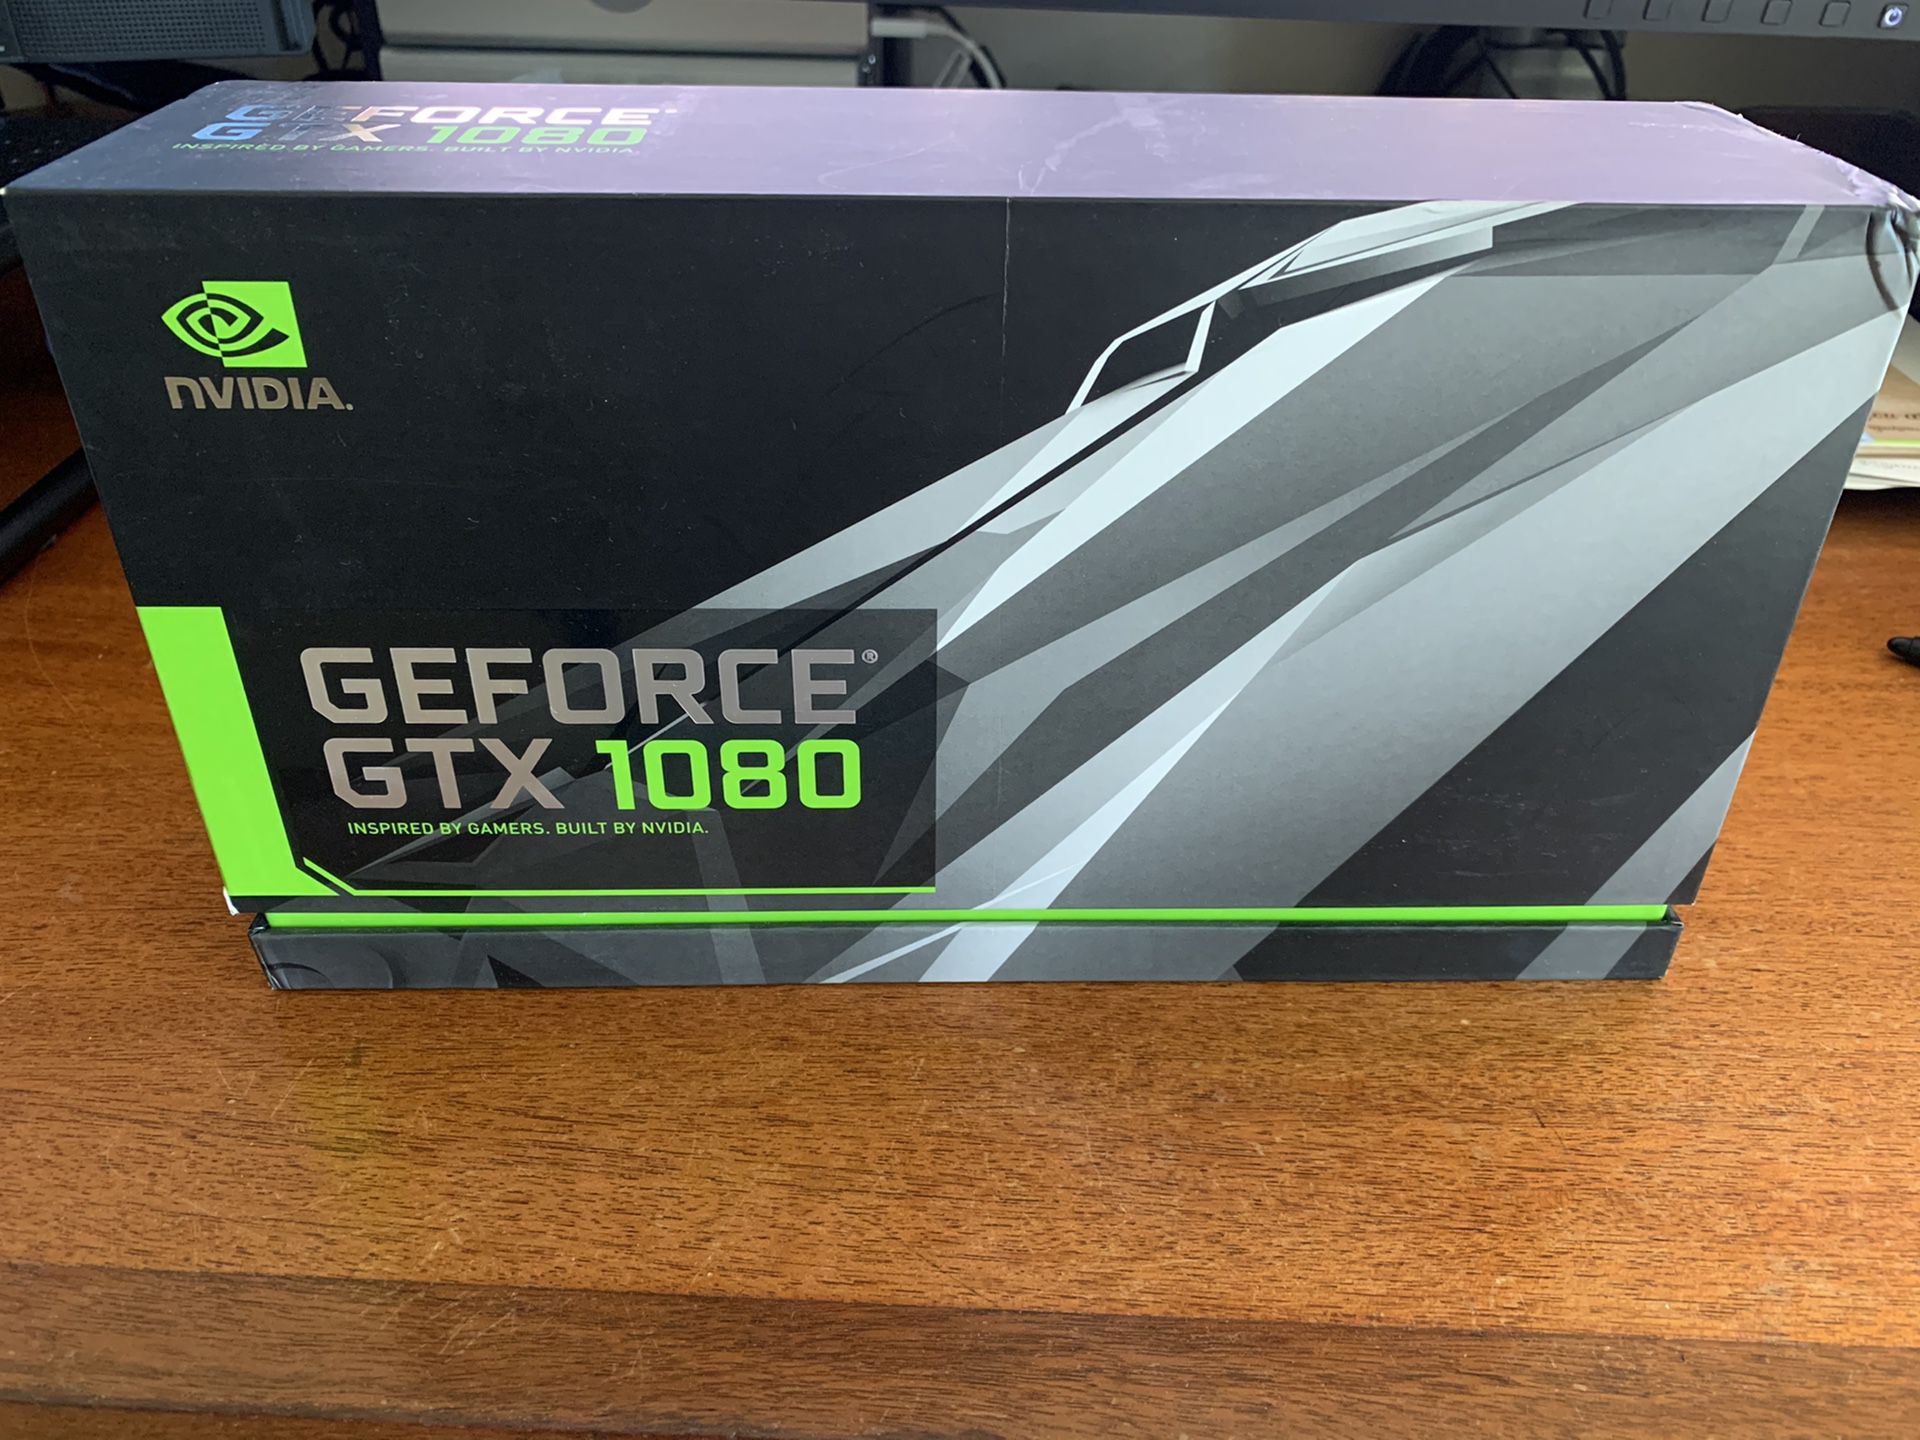 NVIDIA GeForce GTX 1080 Founders Edition, 8GB GDDR5X PCI Express 3.0 Graphics Card